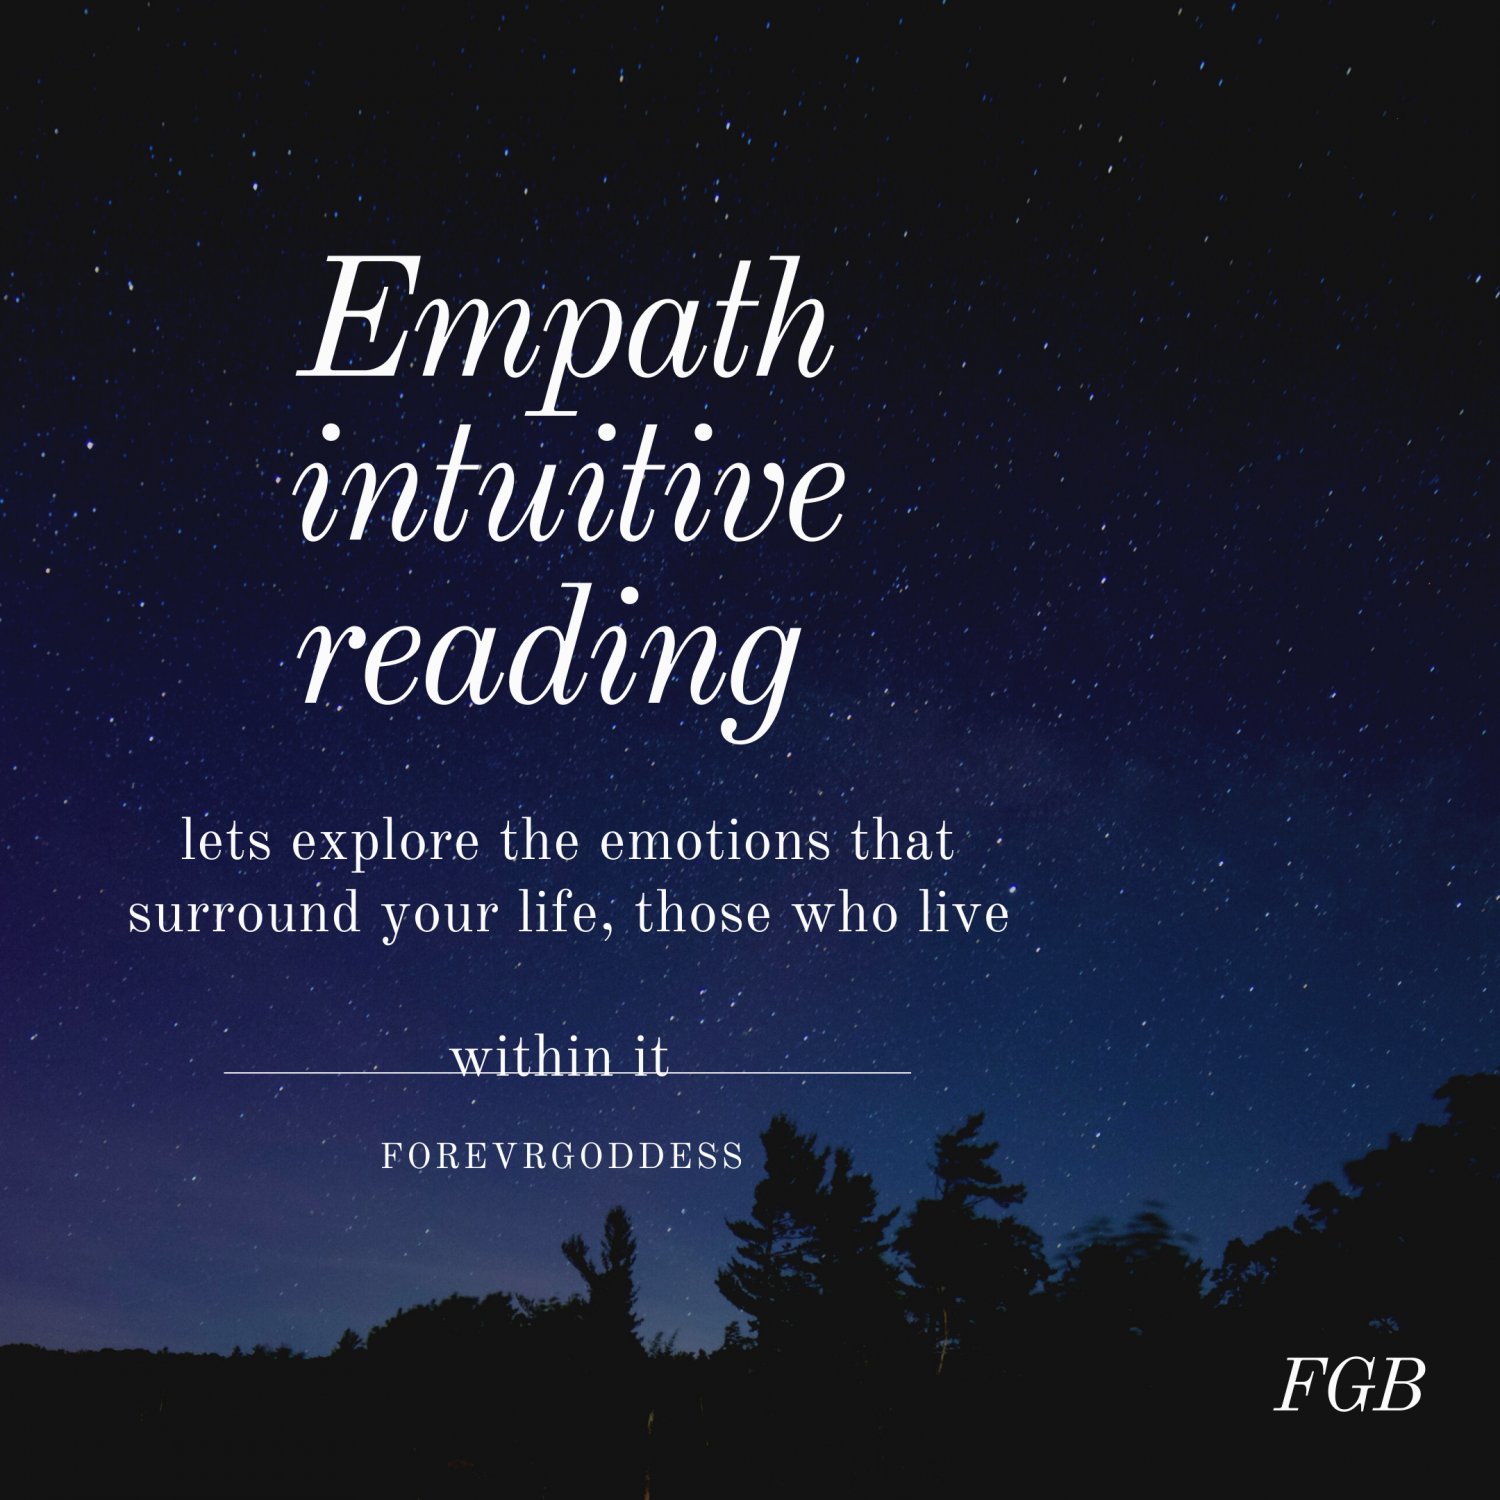 Empath intuitive reading